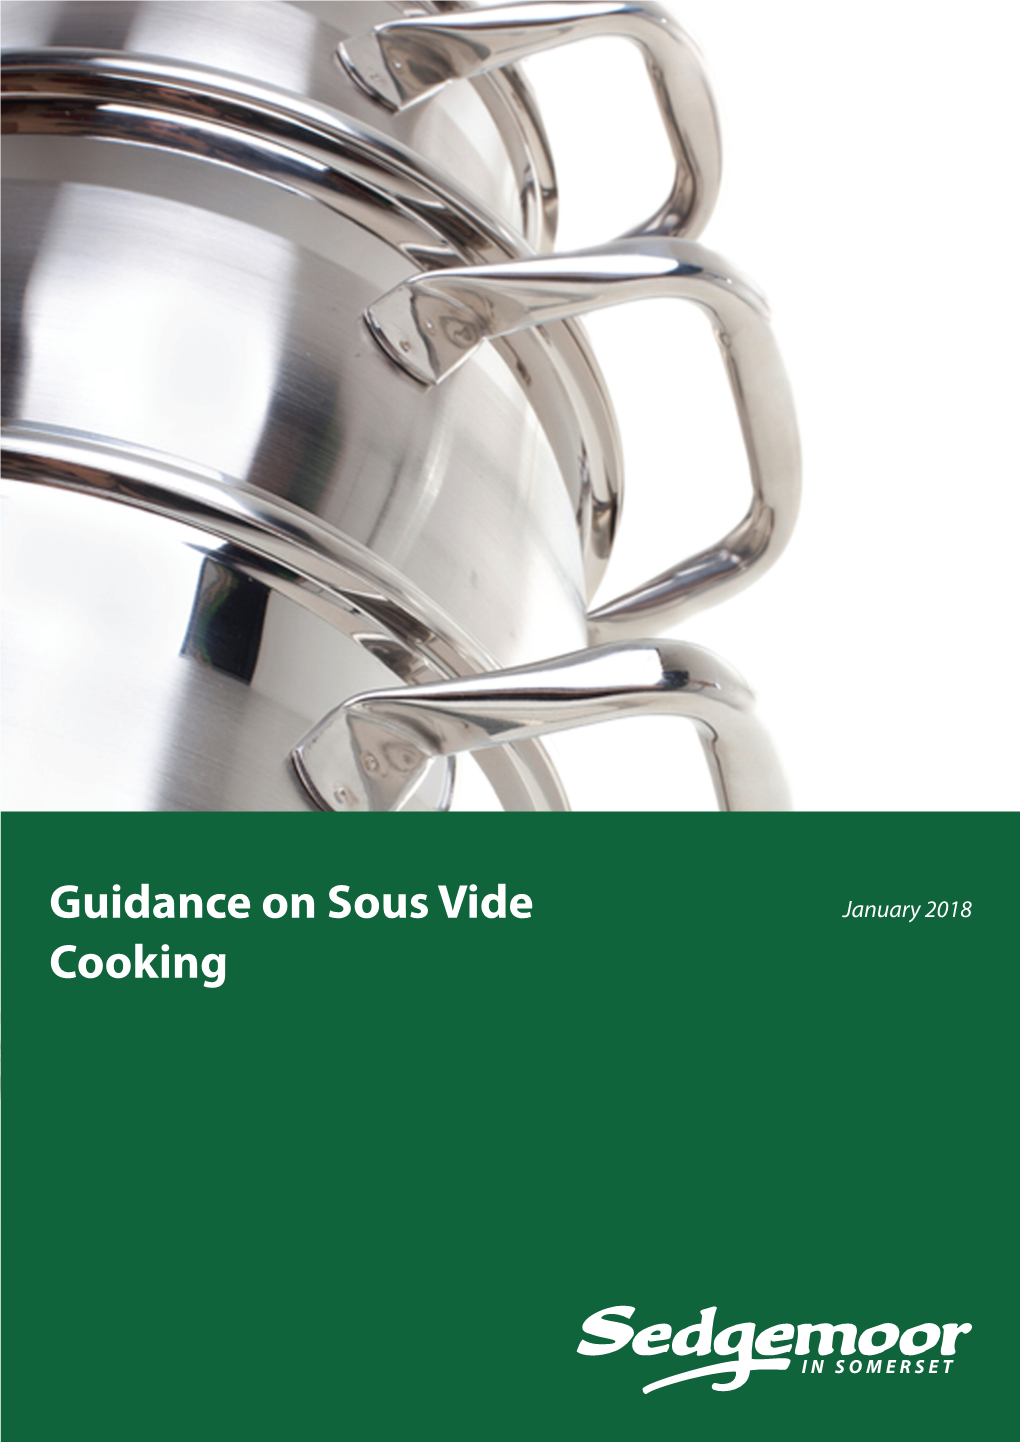 Guidance on Sous Vide Cooking